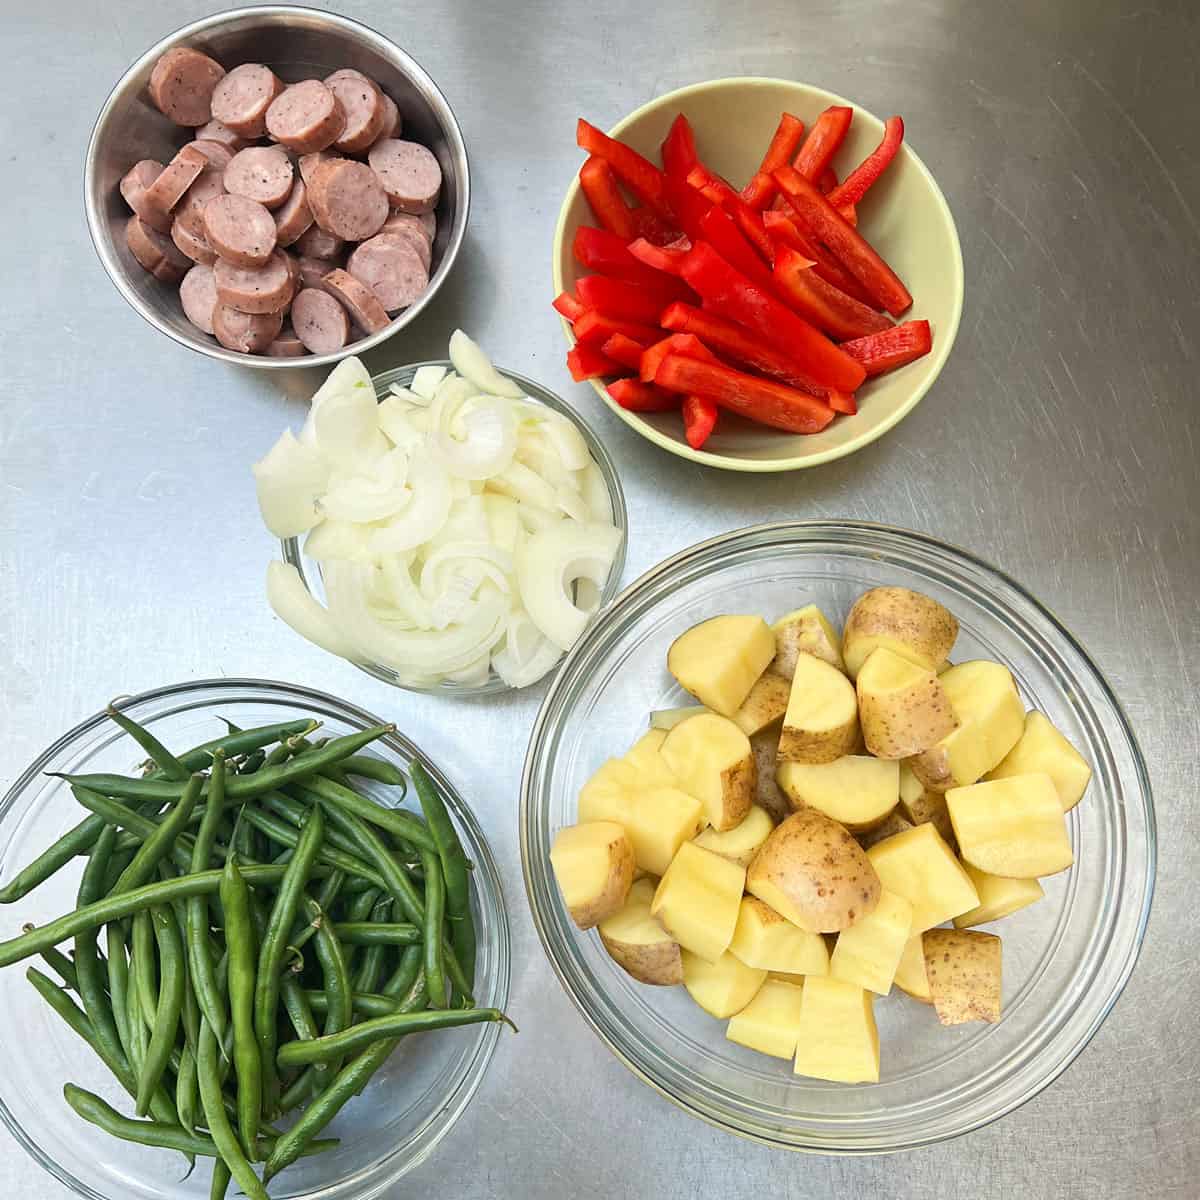 5 bowls on a stainless counter top filled with: red bell pepper strips, sliced onion, cubed gold potatoes, green beans and sliced sausages.